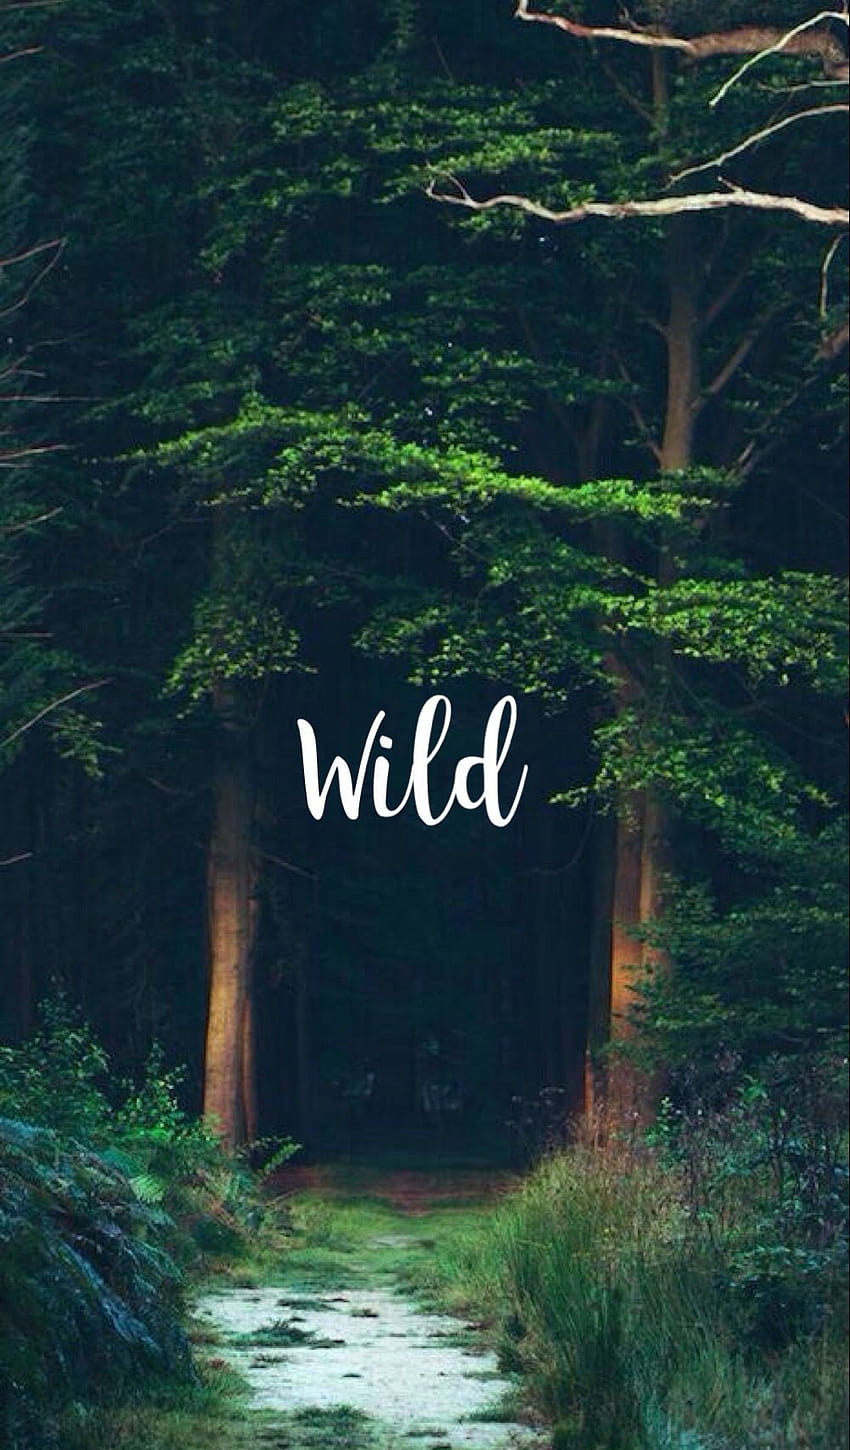 Step out into the wild today, its fabulous for the mind, body and, into the wild iphone HD phone wallpaper